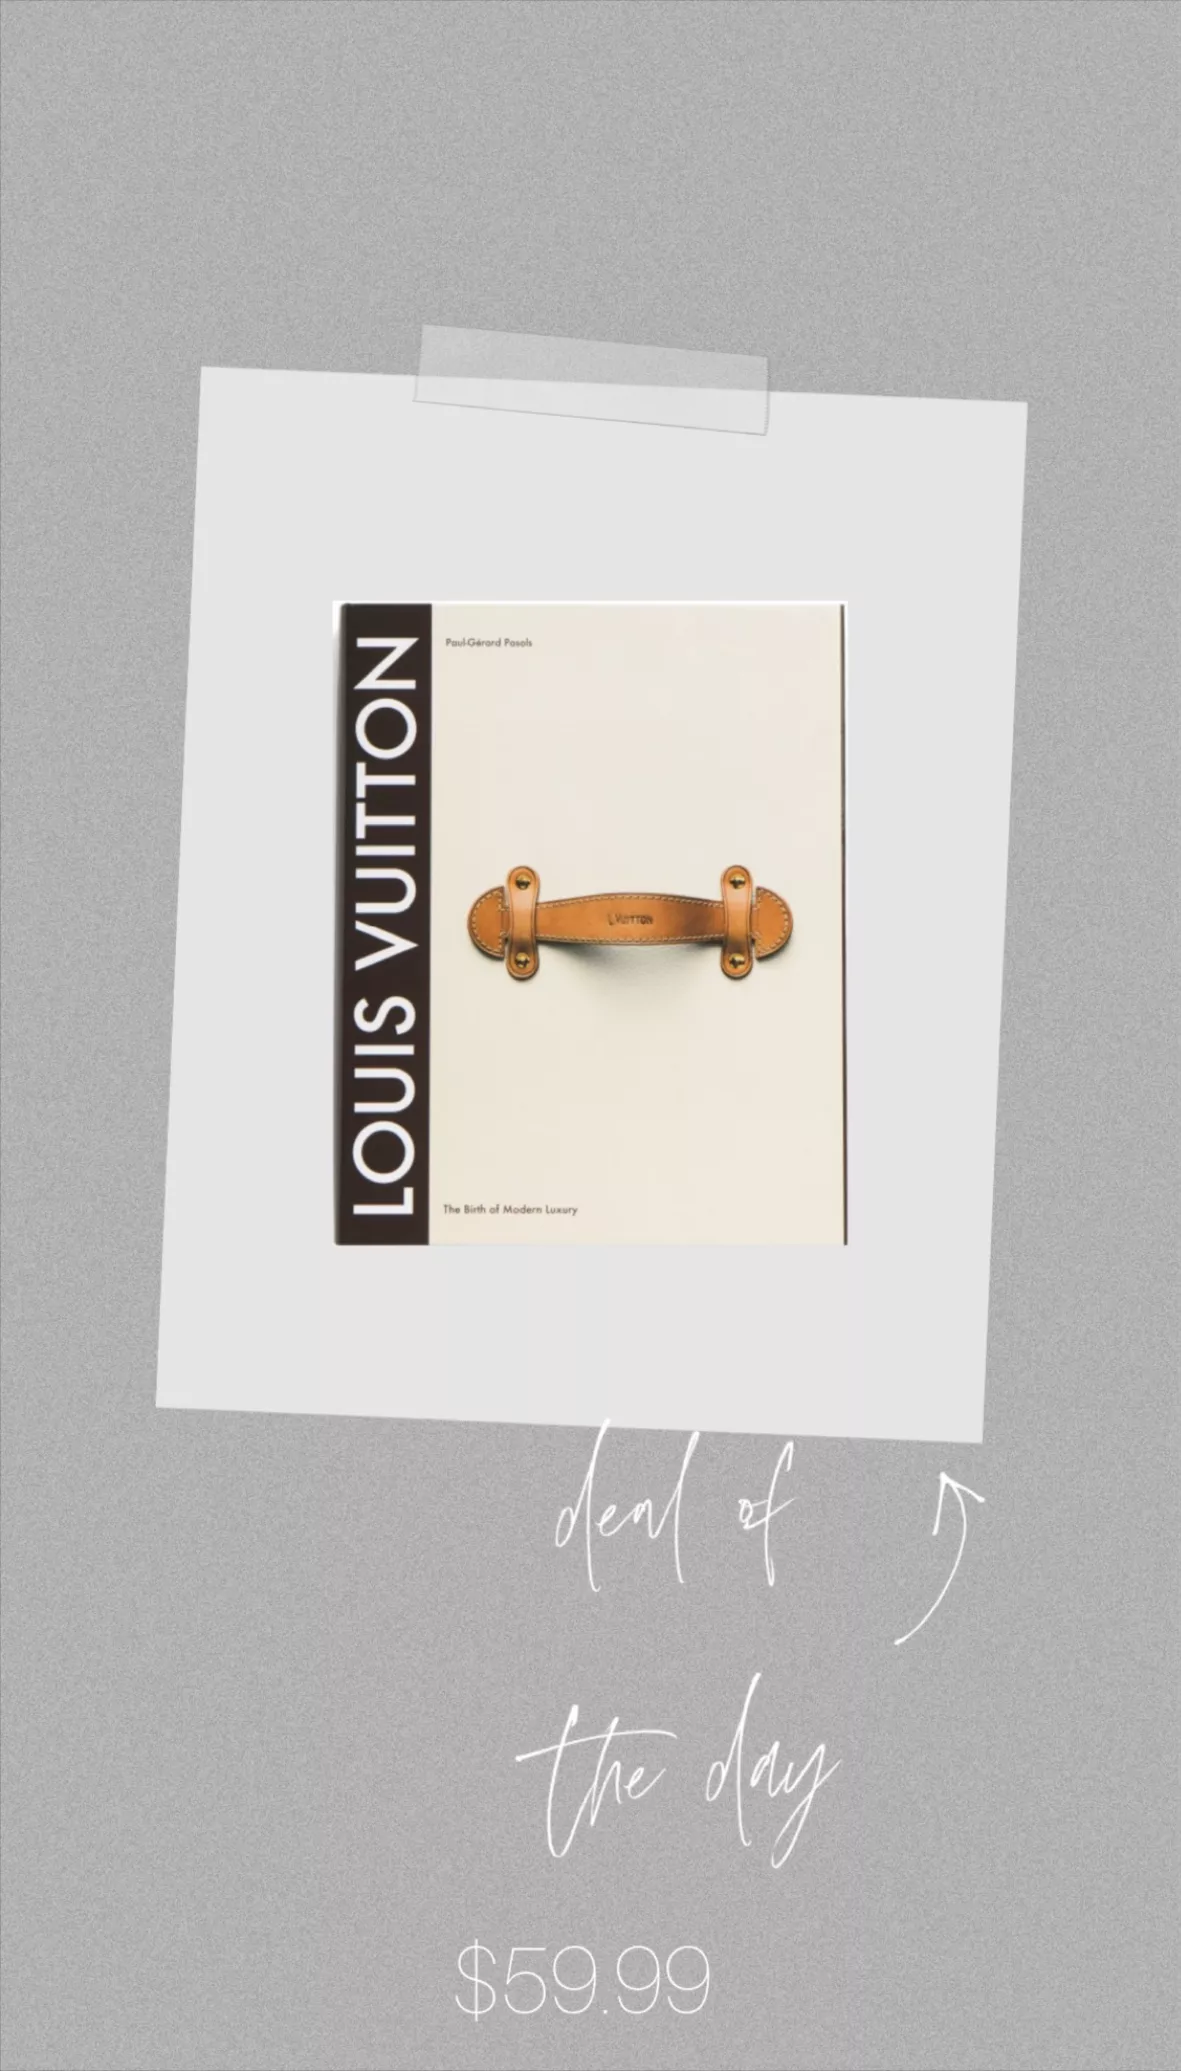 Louis Vuitton: the Birth of Modern Luxury Updated Edition by Louis Vuitton